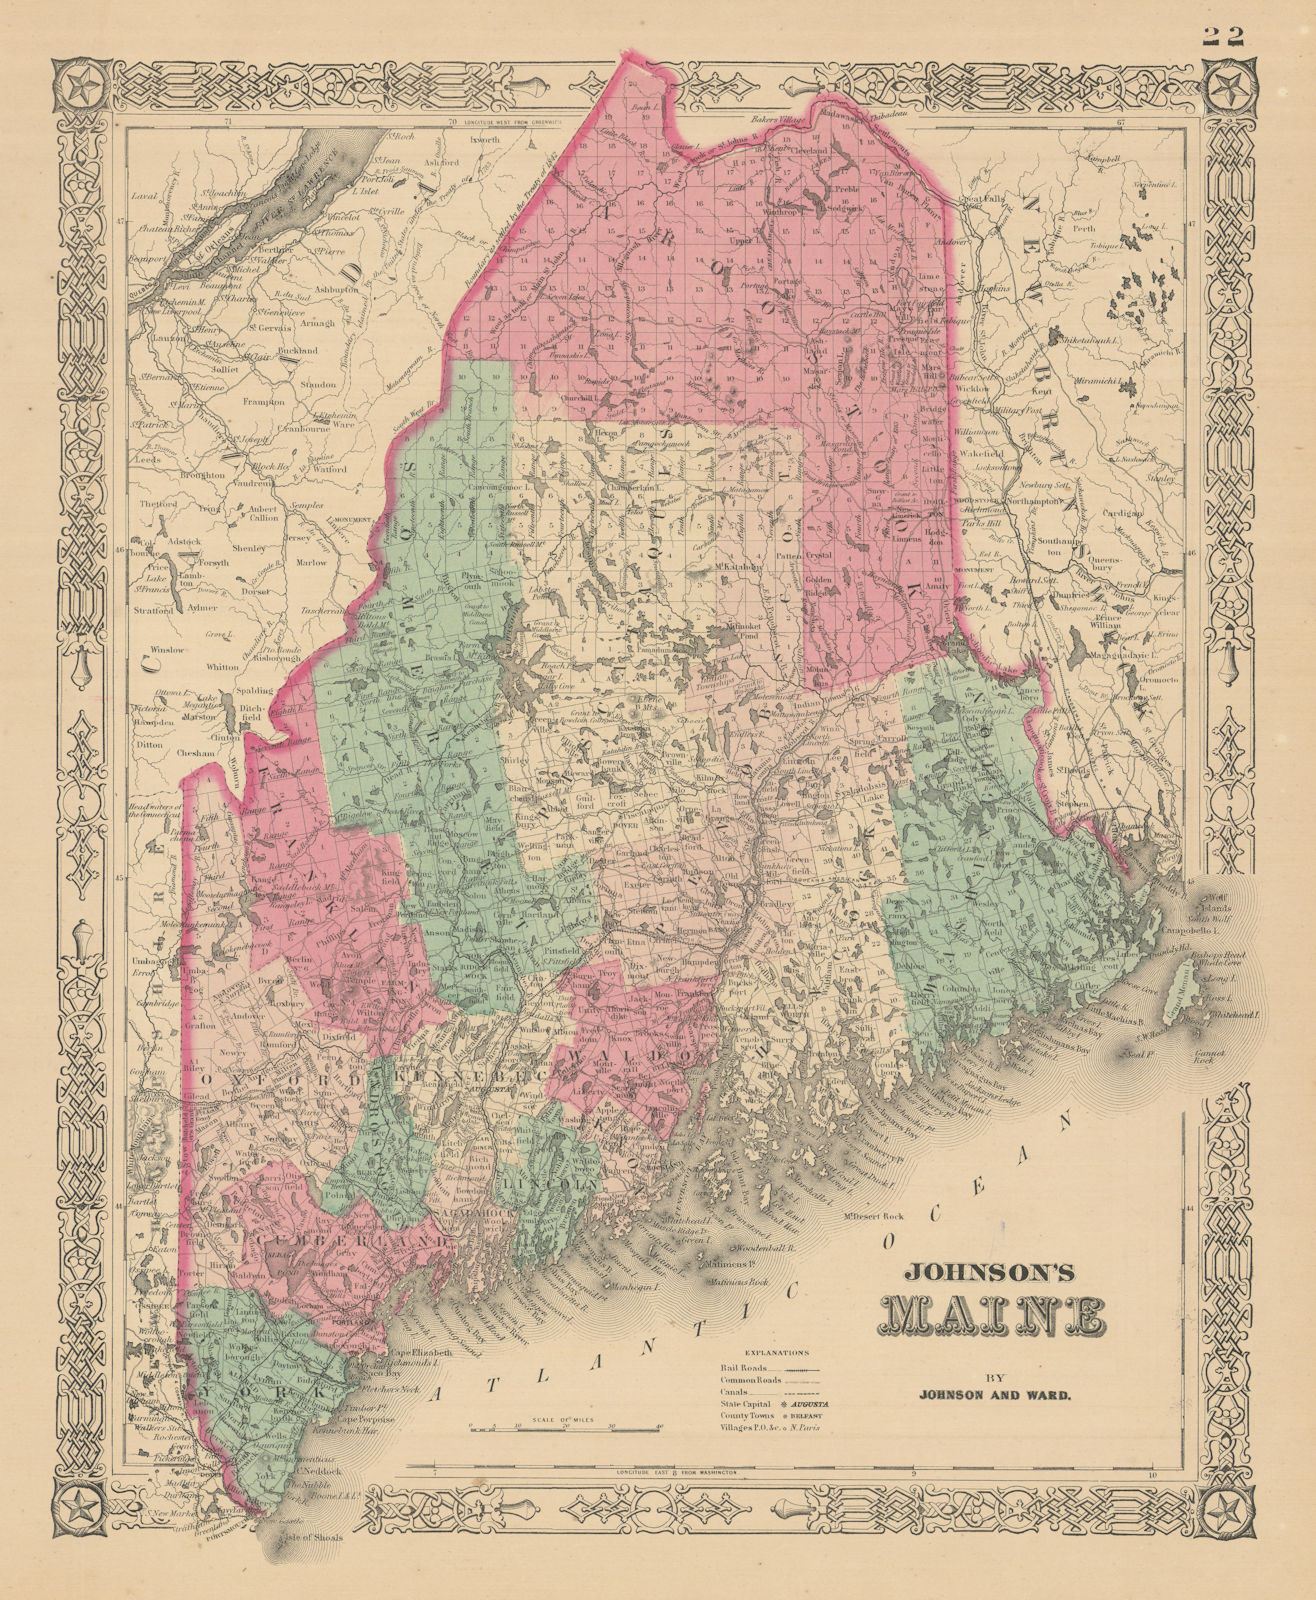 Associate Product Johnson's Maine. US State map showing counties 1866 old antique plan chart